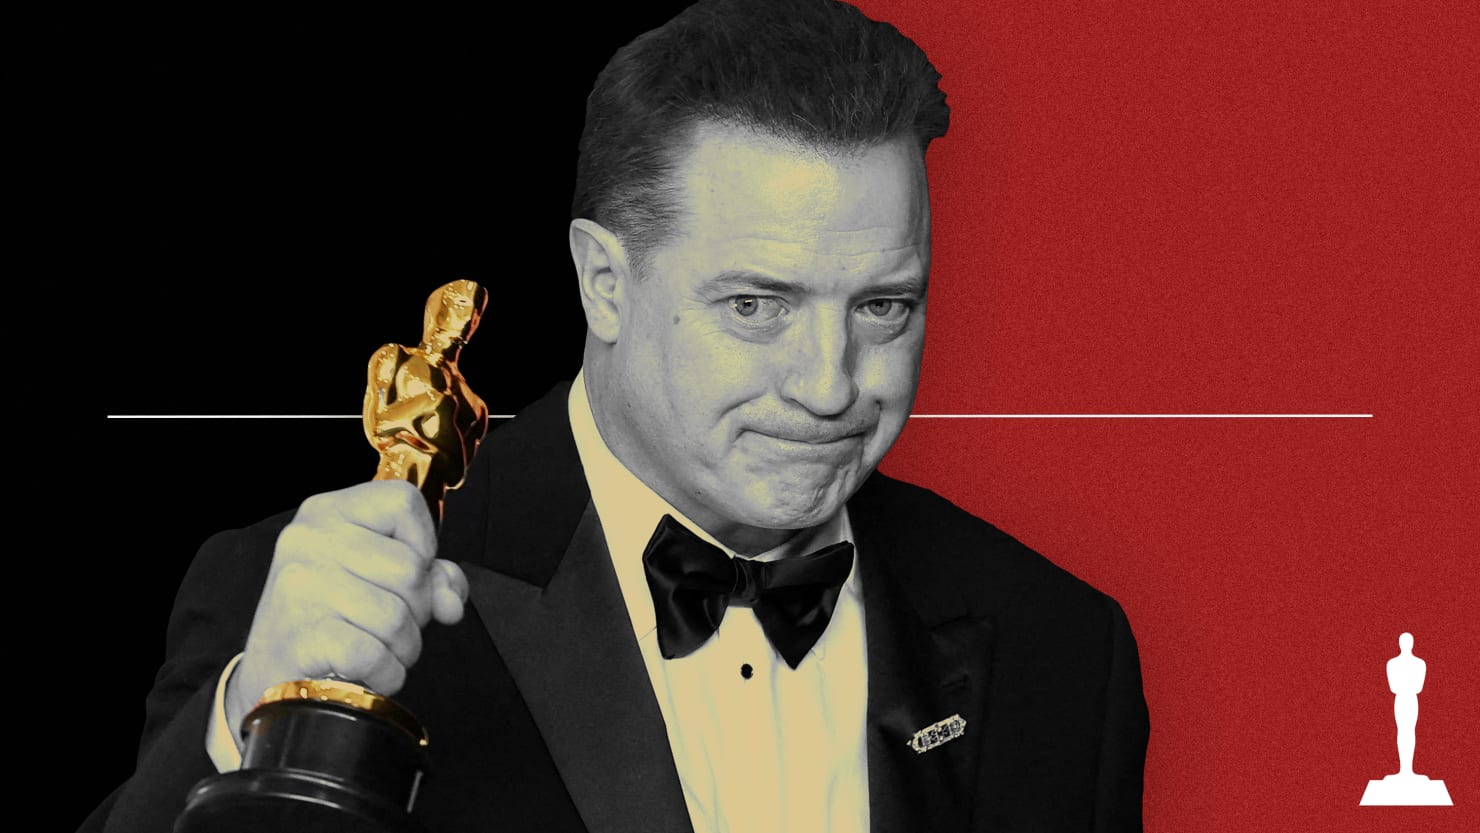 Brendan Fraser's Best Actor Win for 'The Whale': Fatphobia at Its Worst - The Daily Beast